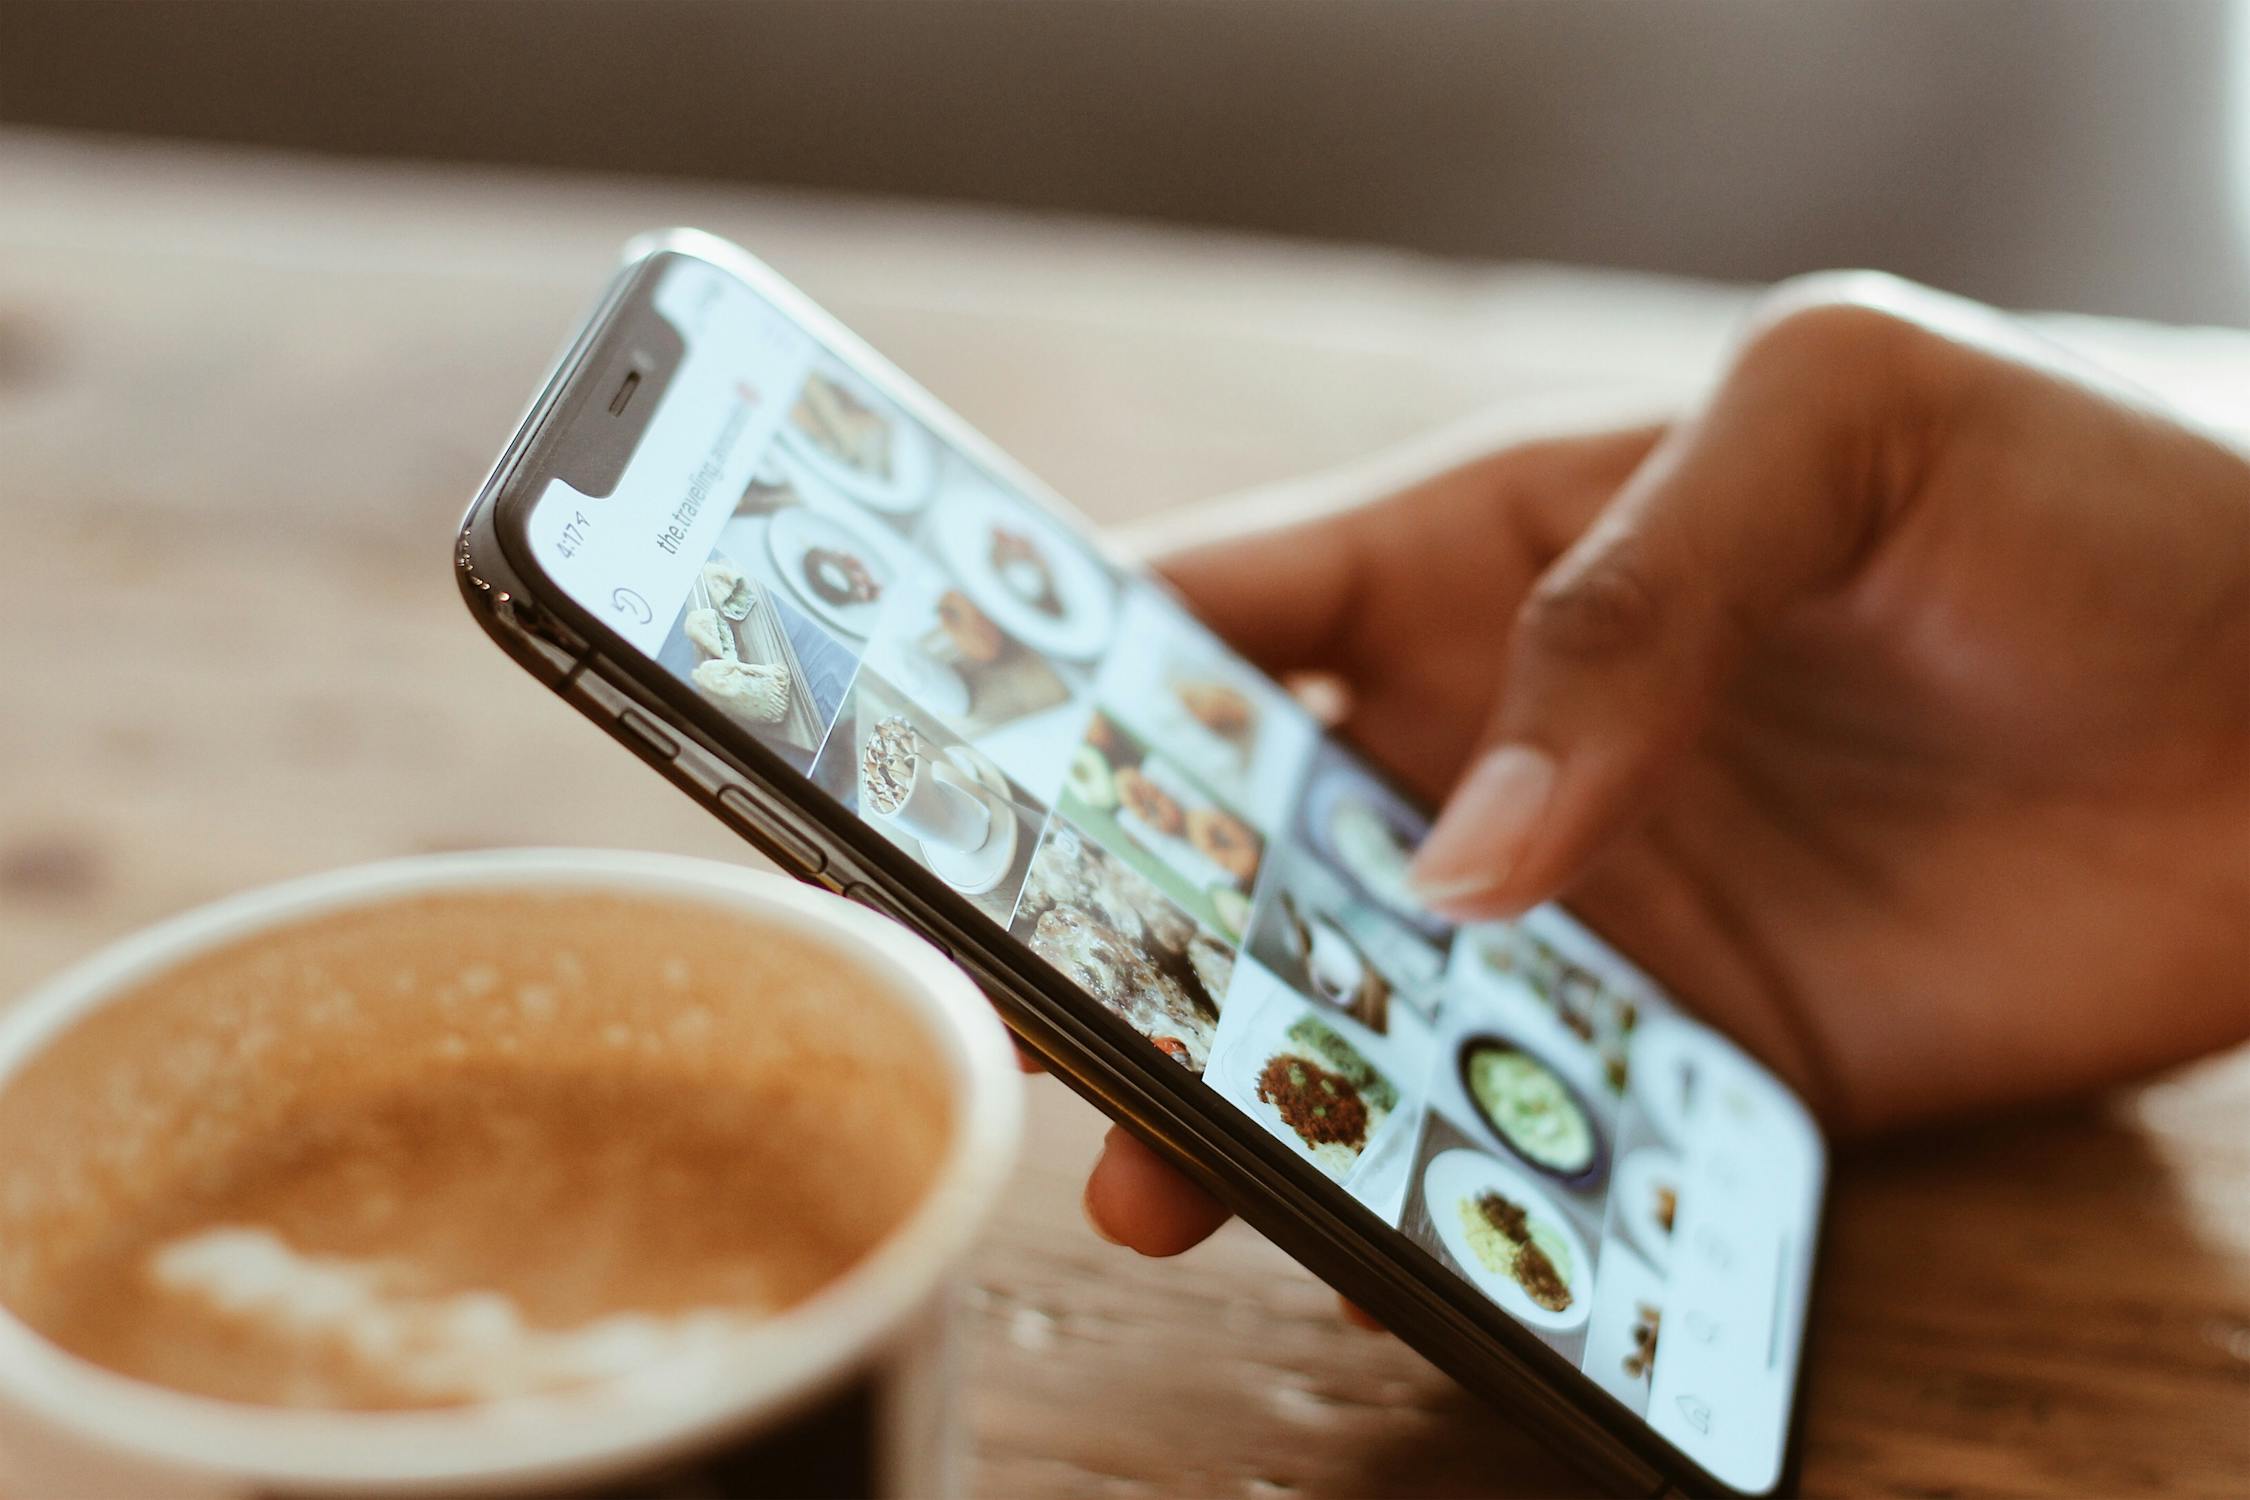 Hand holding mobile phone with images displayed and coffee in the background pros and cons of instagram